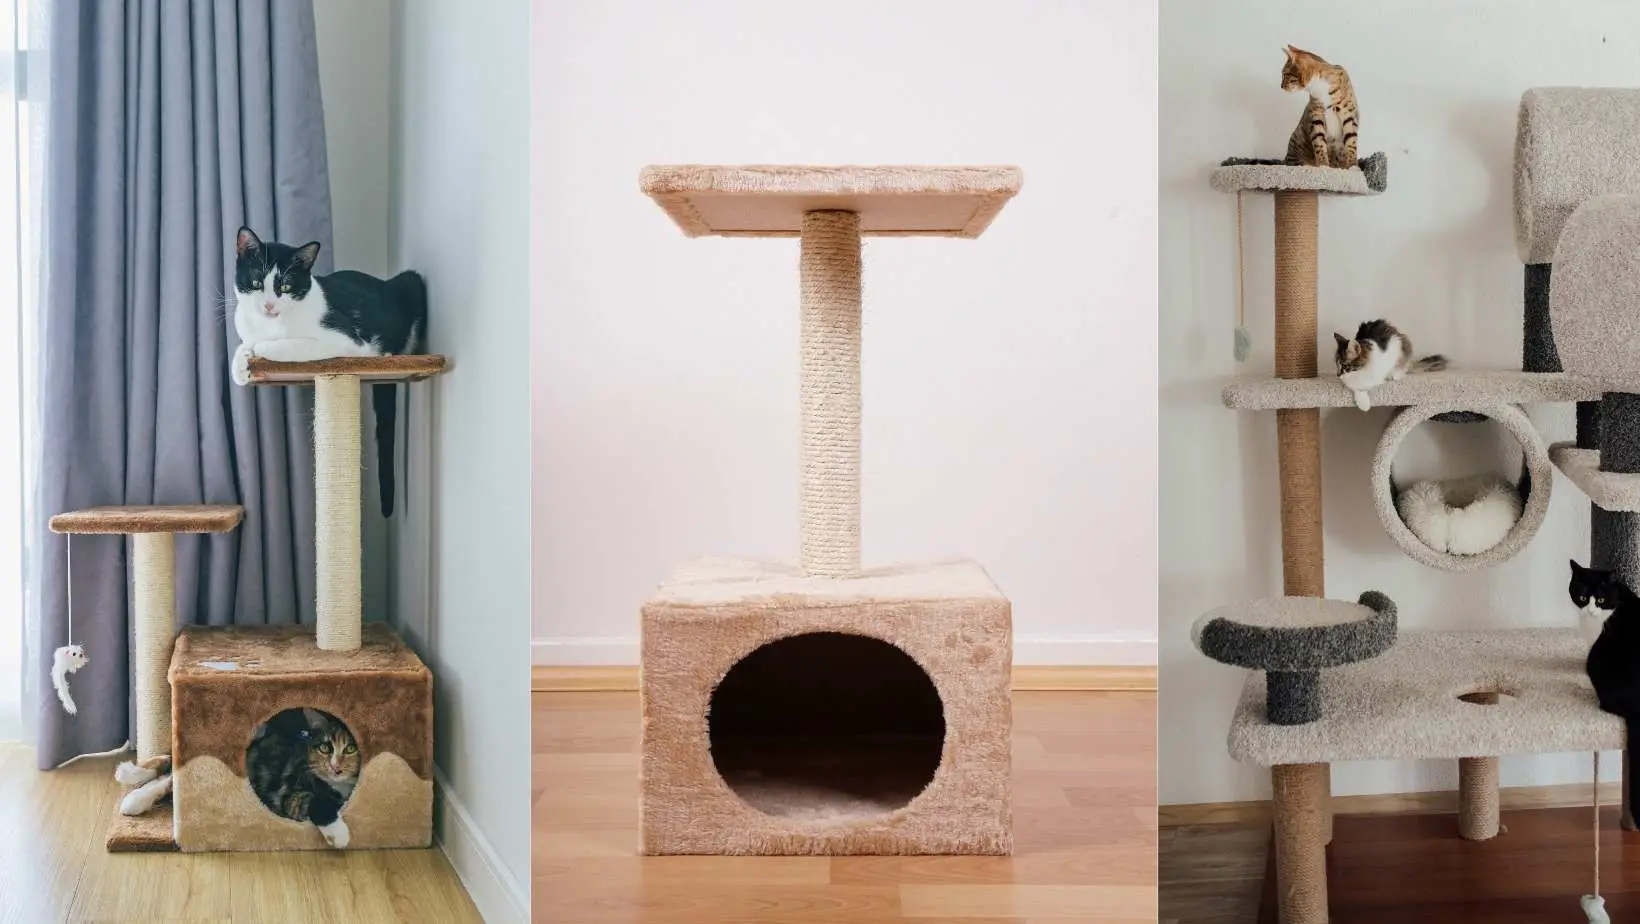 How to Make Cat Tree?